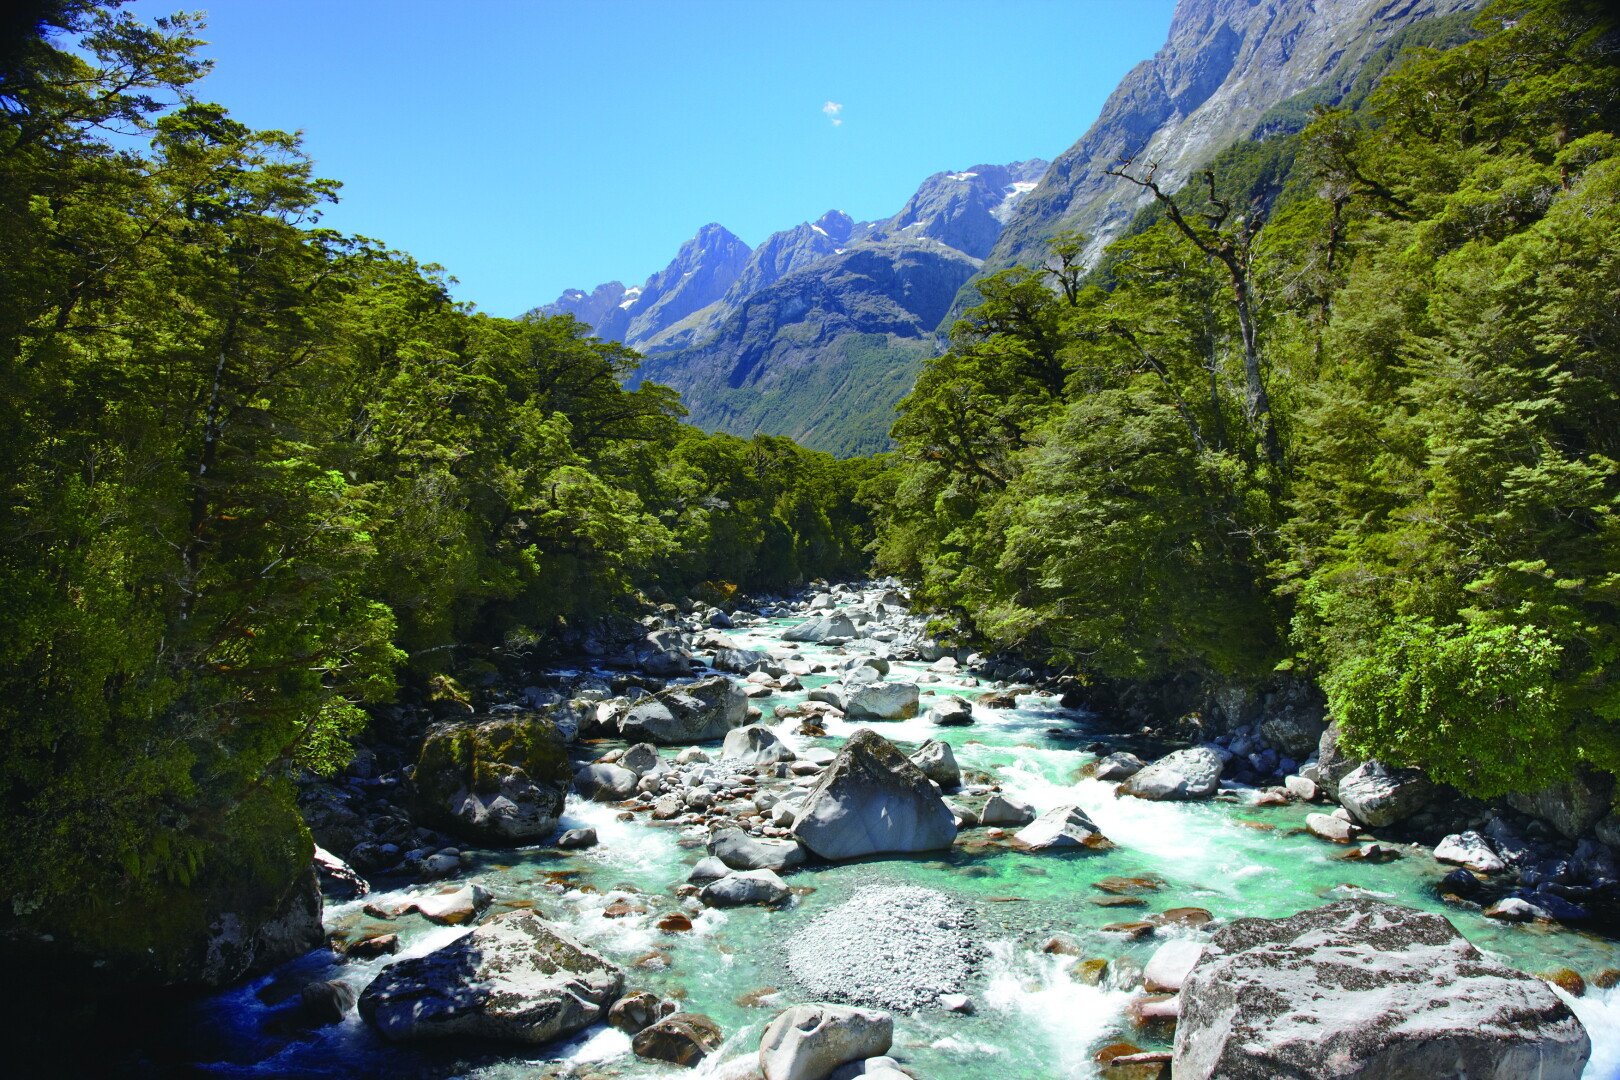 Impressive picture of the Upper Hollyford River.